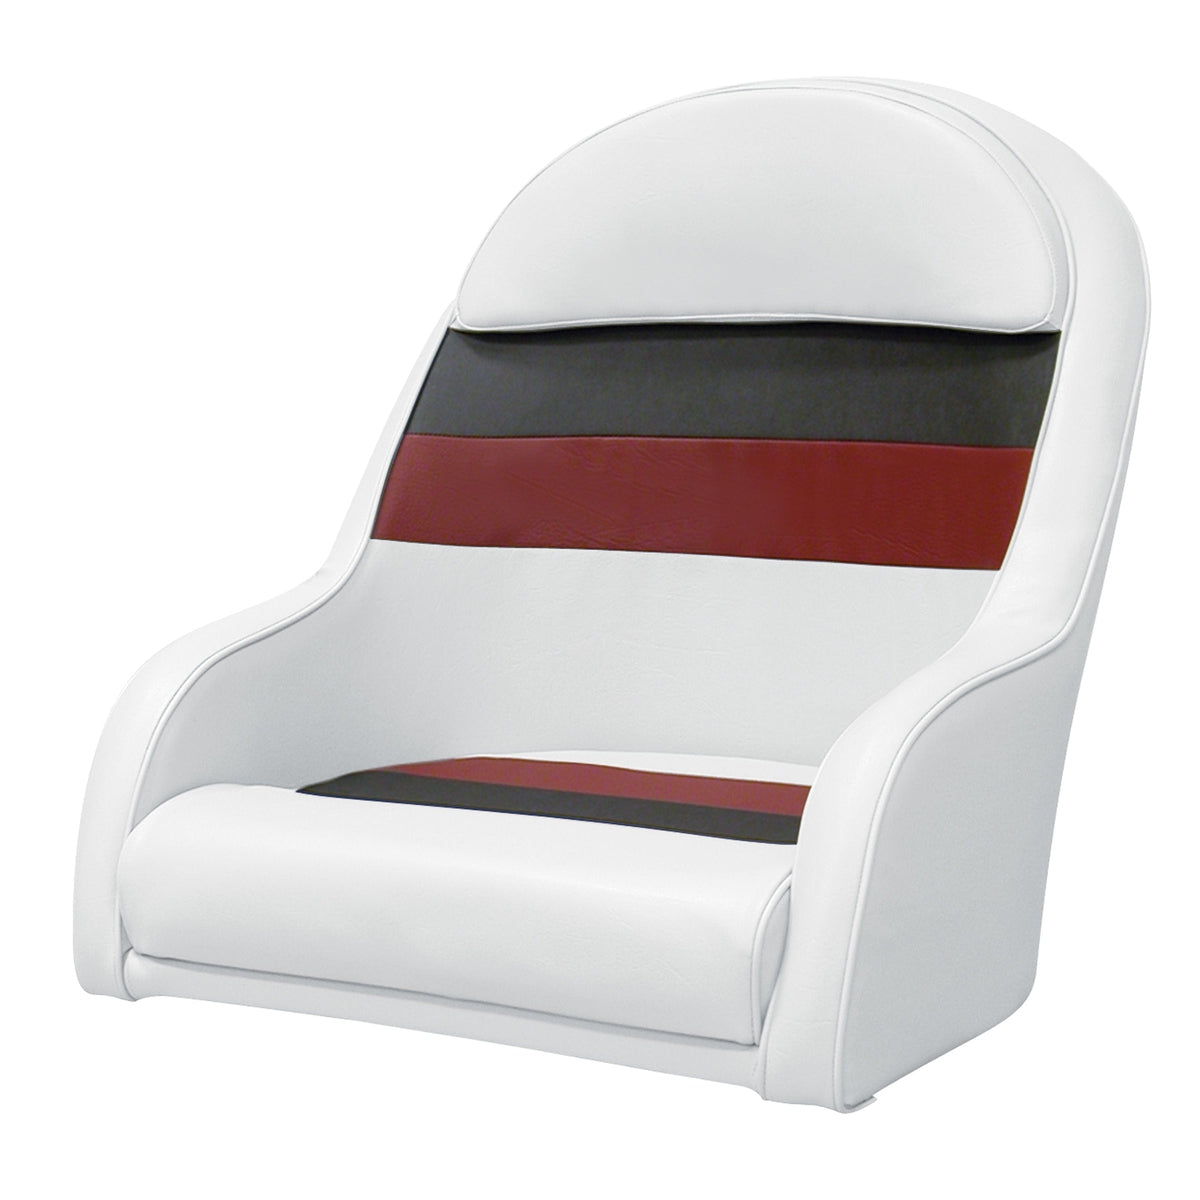 Wise Oversized - Not Qualified for Free Shipping Wise Captain's Bucket Seat White/Charcoal/Red #8WD120LS-1009